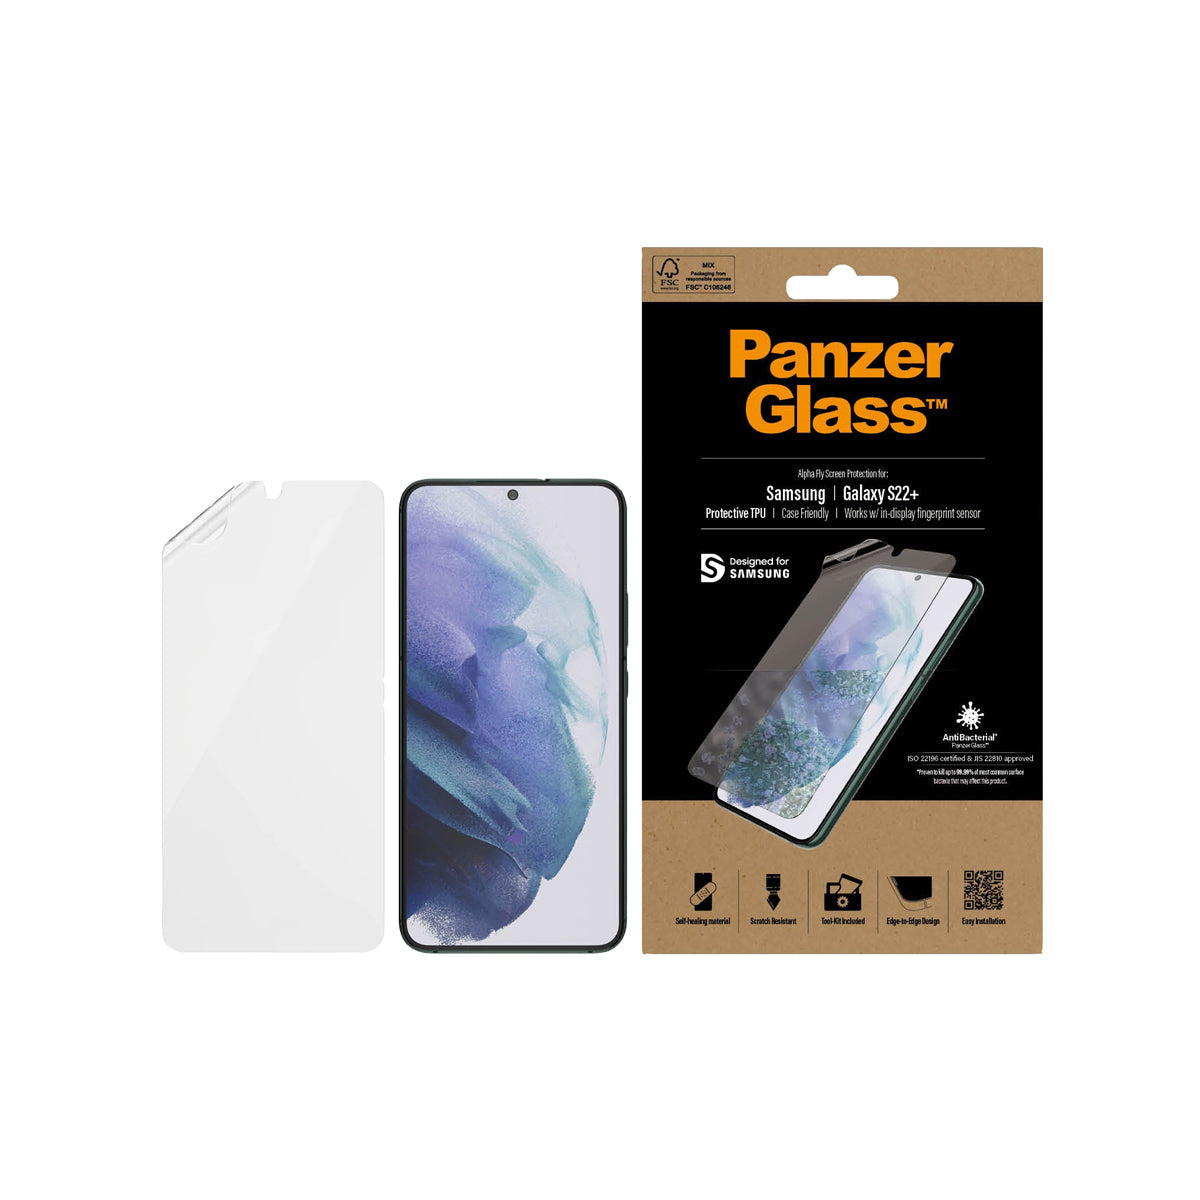 PanzerGlass TPU Antibacterial Phone Screen Pprotector for Samsung GS22+ - Clear.